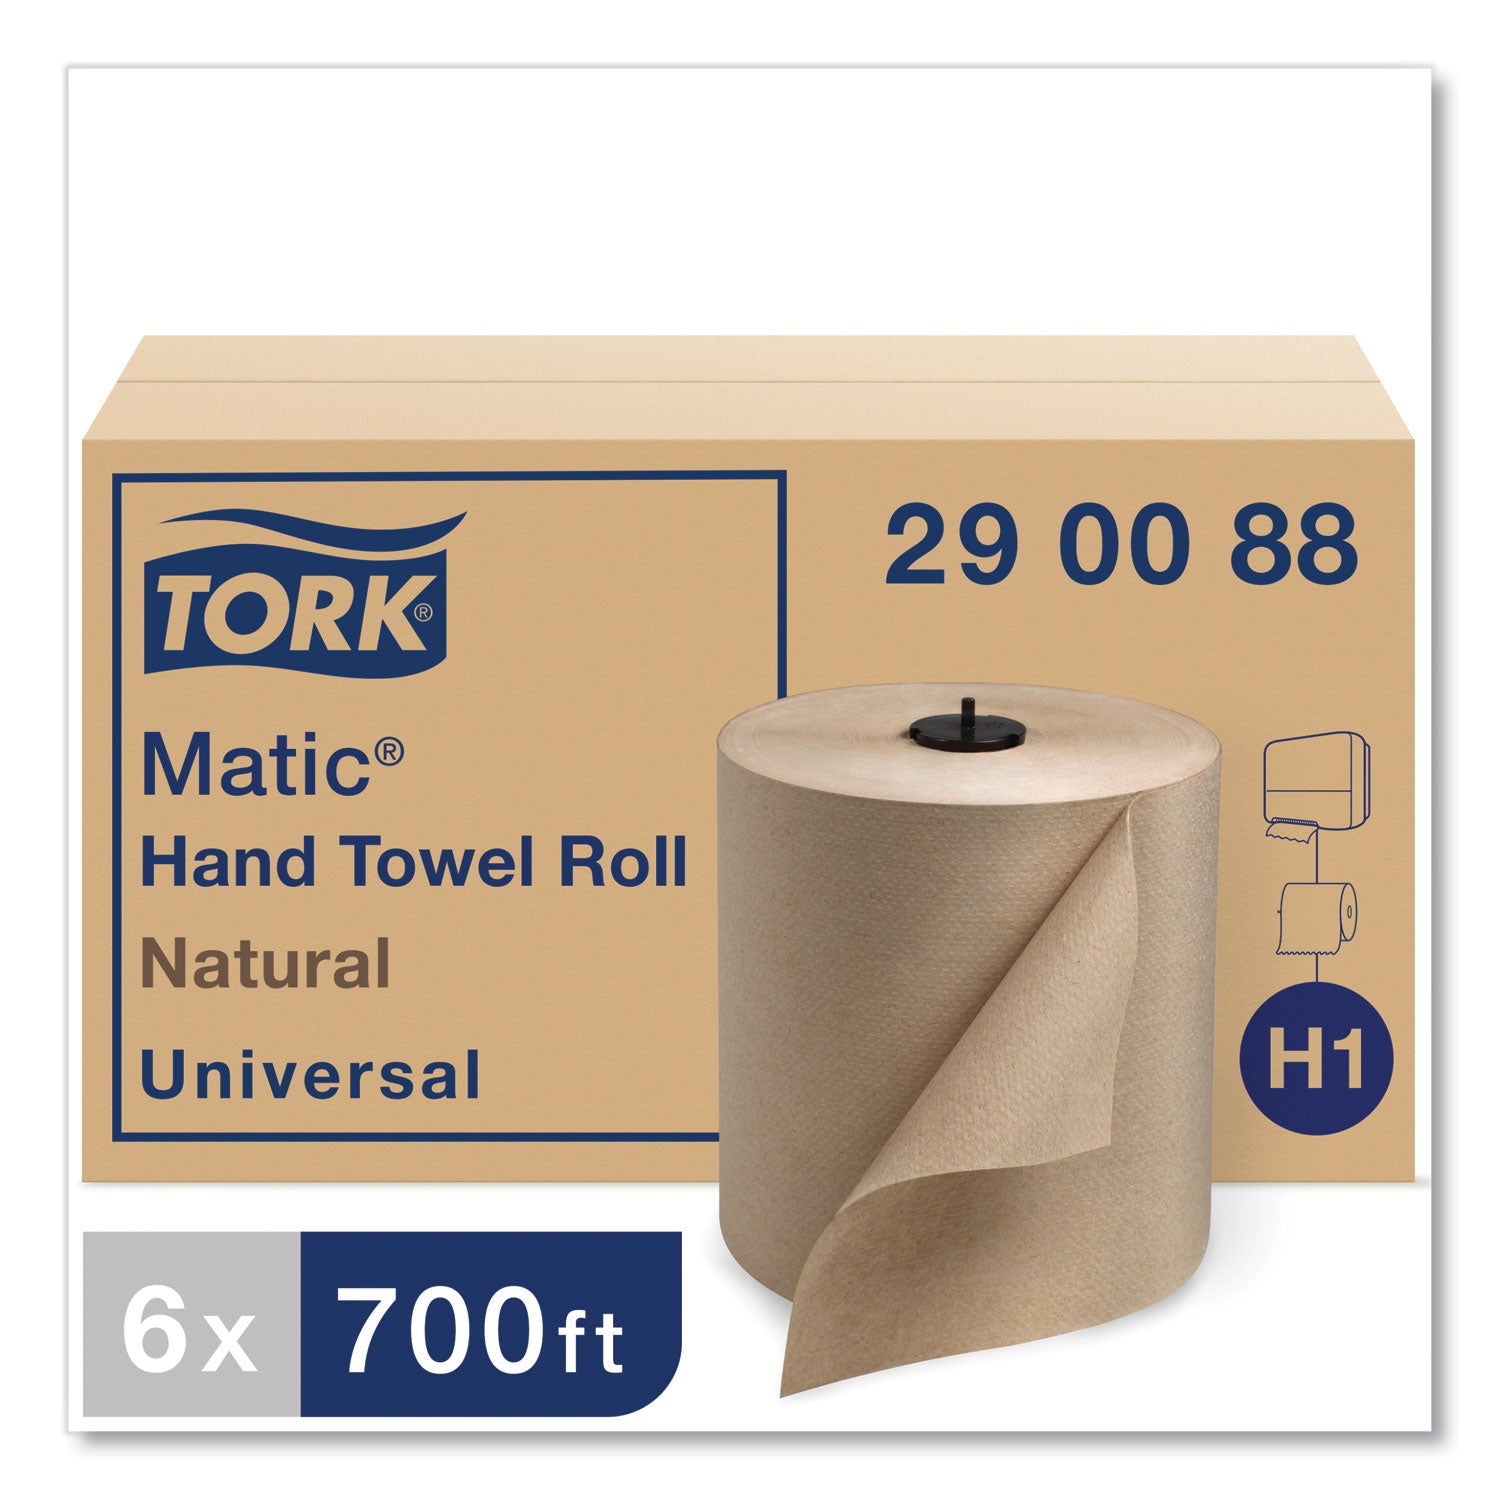 matic-hardwound-roll-towel-1-ply-77-x-700-ft-natural-857-roll-6-rolls-carton_trk290088 - 2